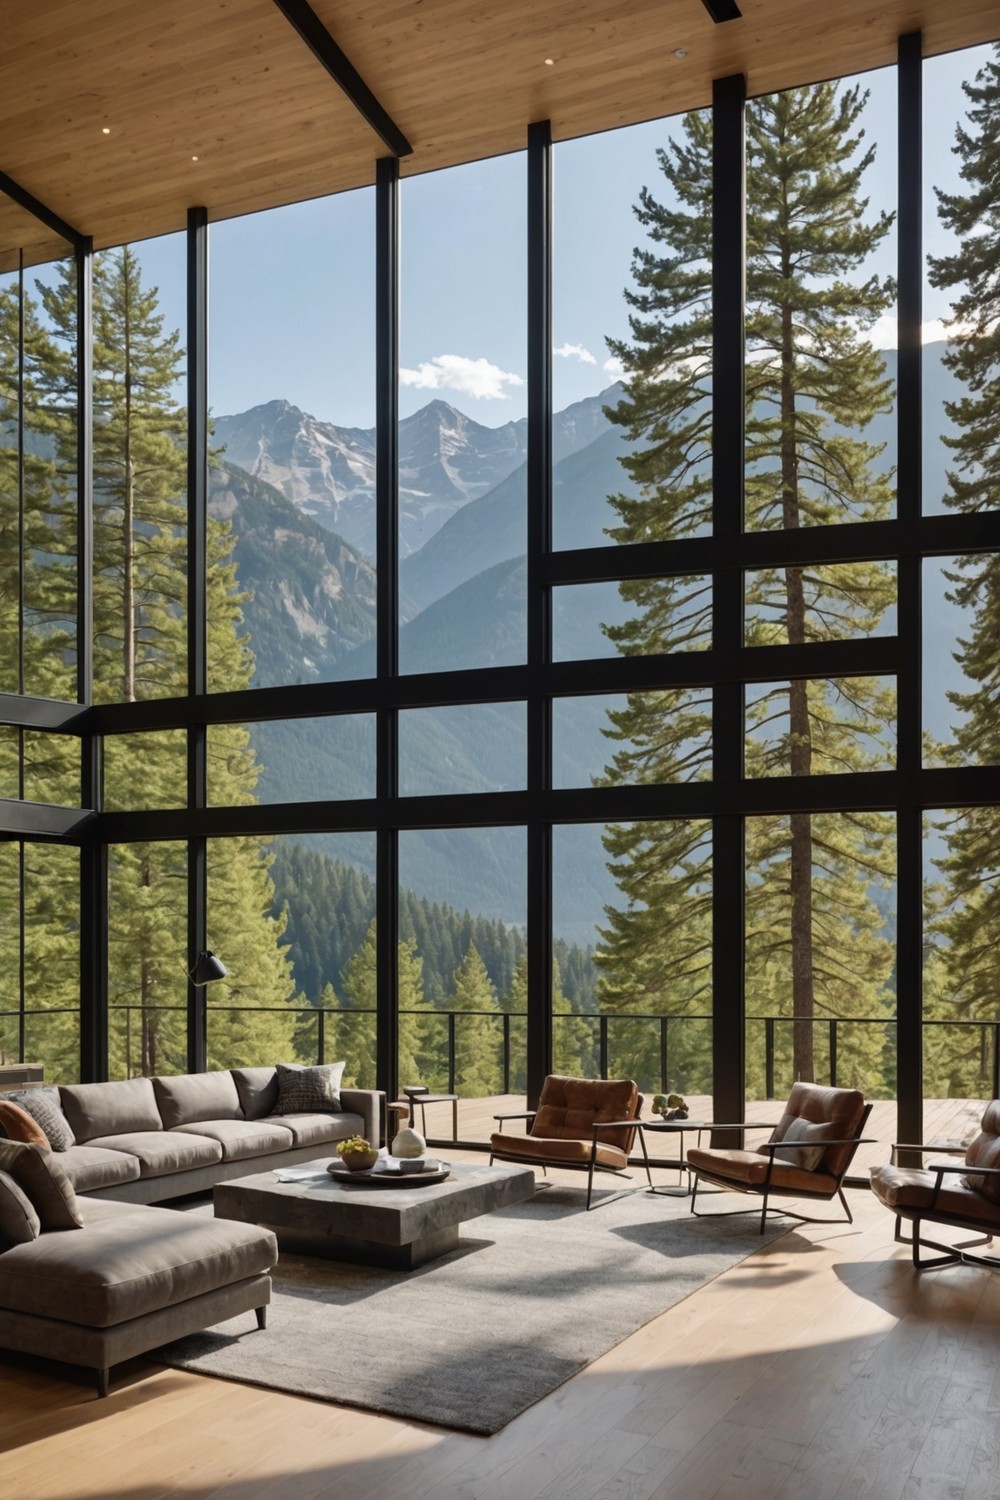 Floor-to-Ceiling Windows for Unobstructed Views